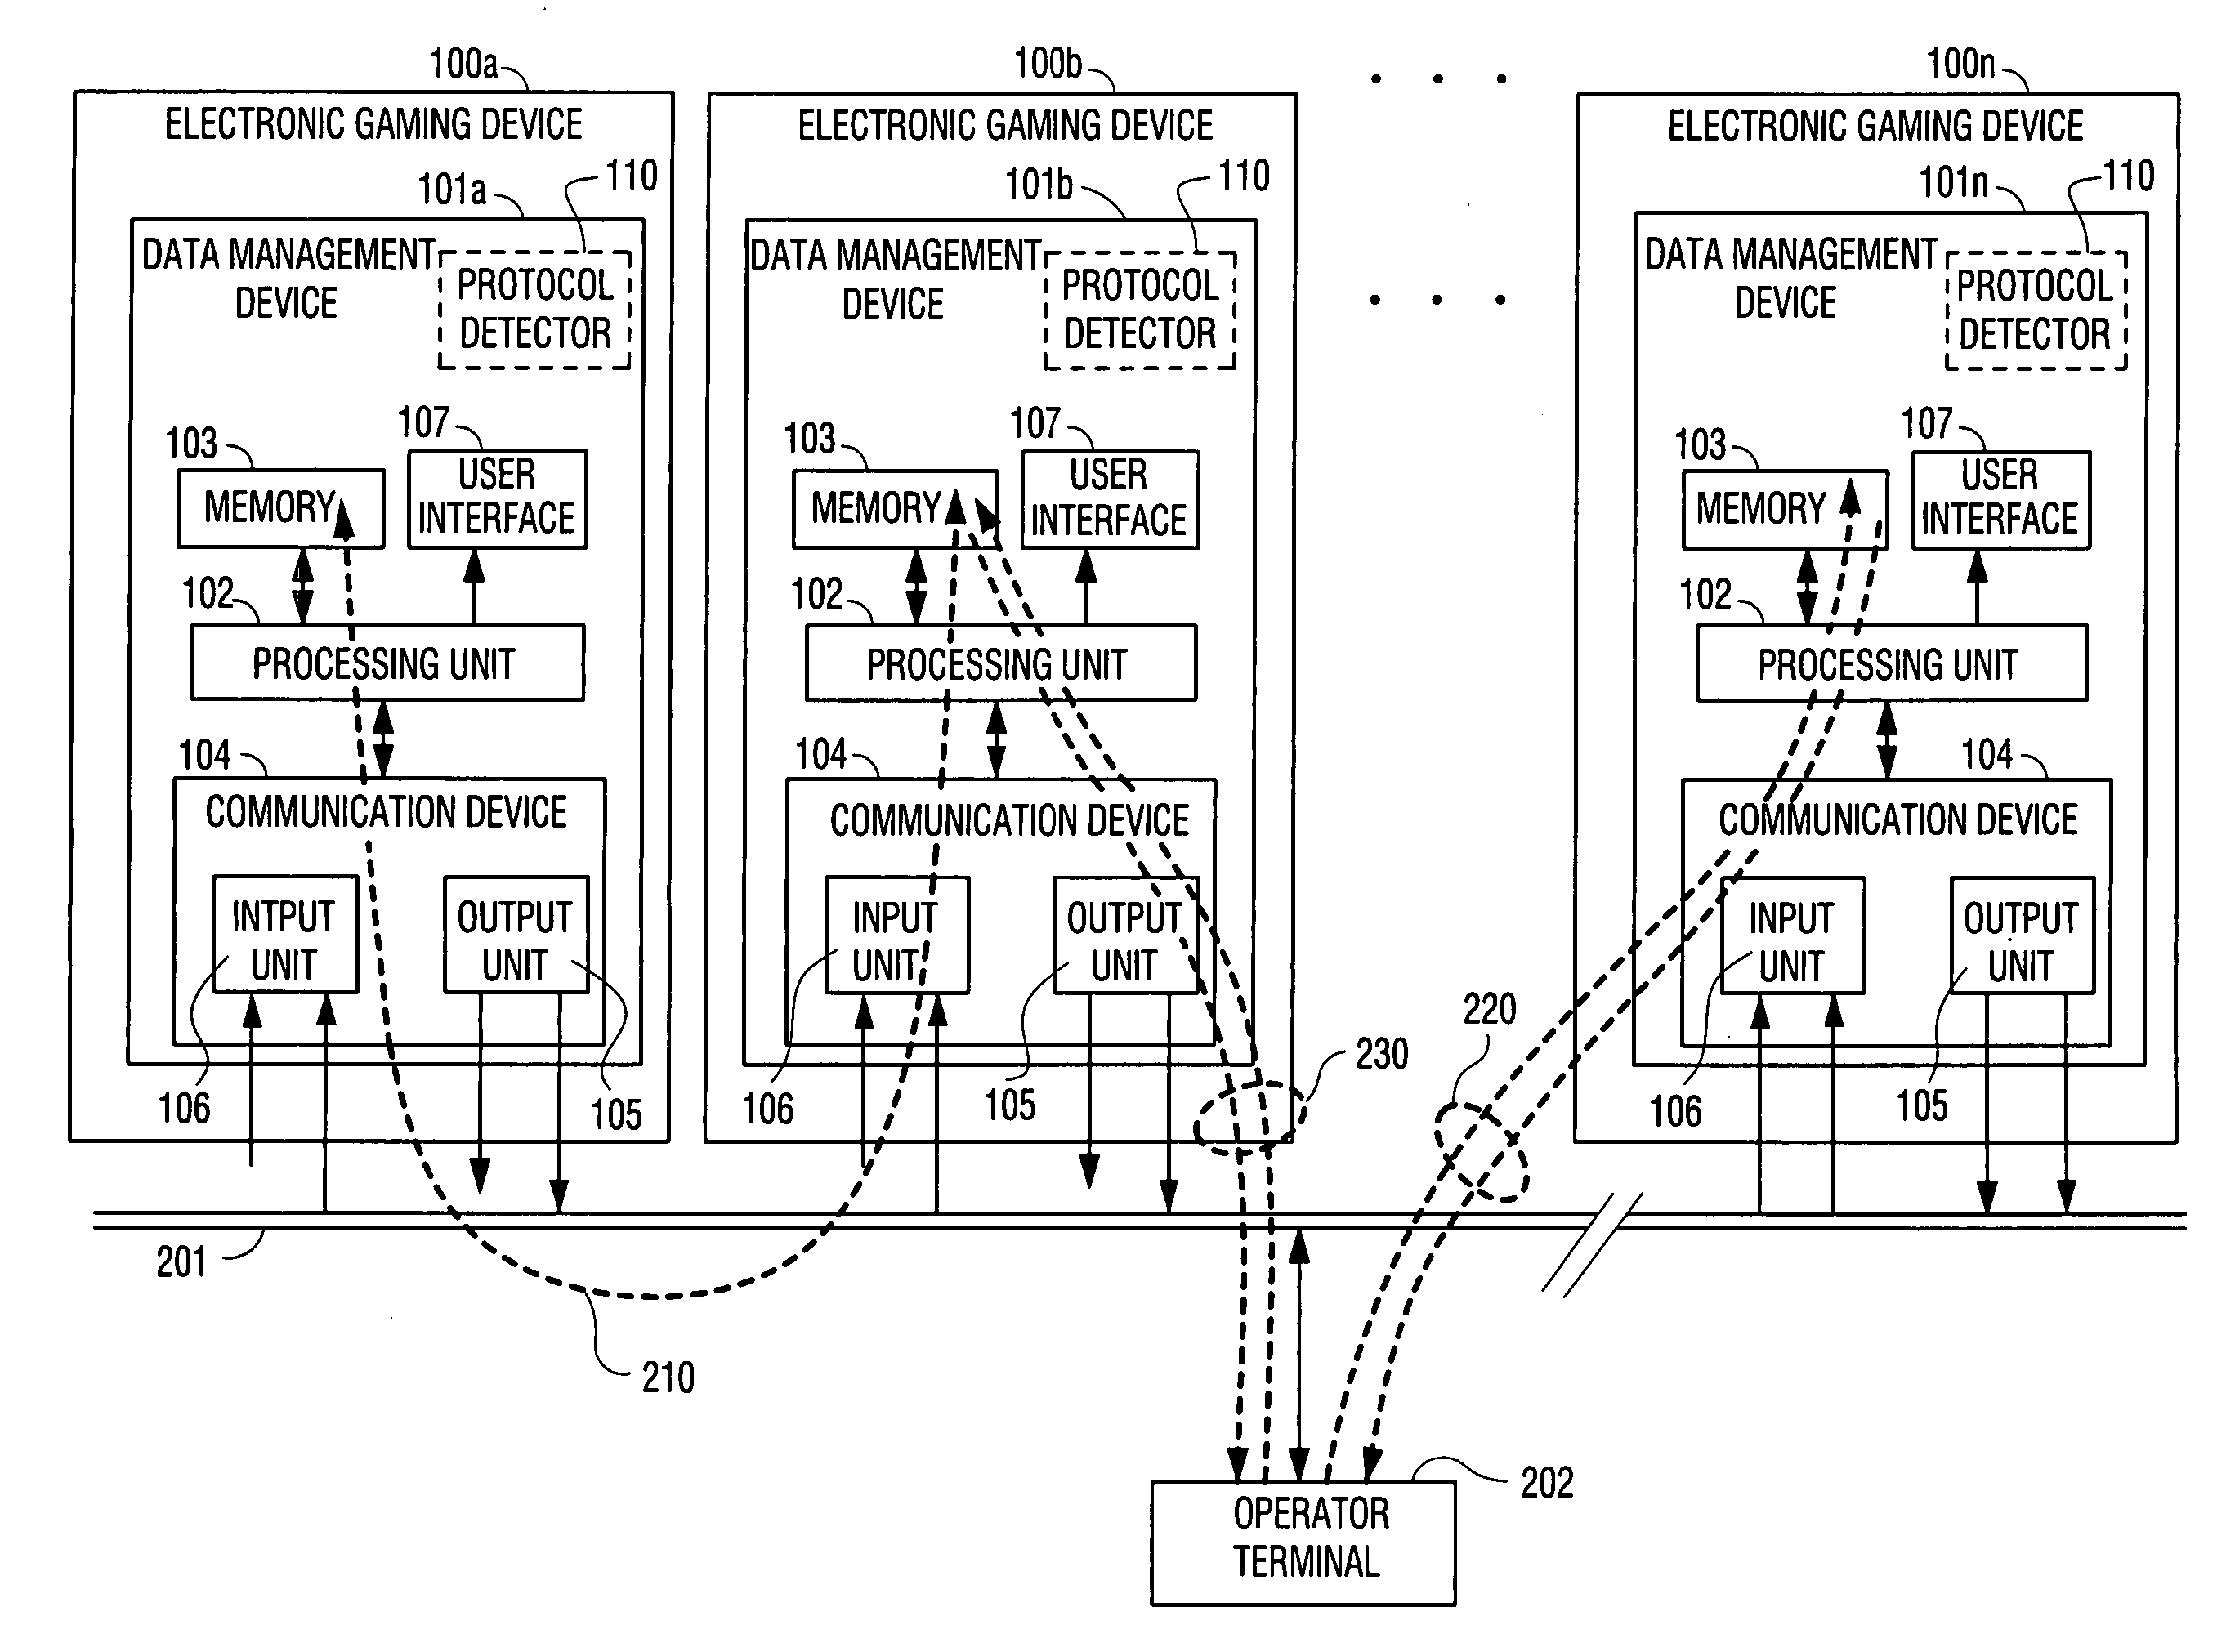 Data management device within an electronic gaming device and a method for monitoring electronic gaming devices